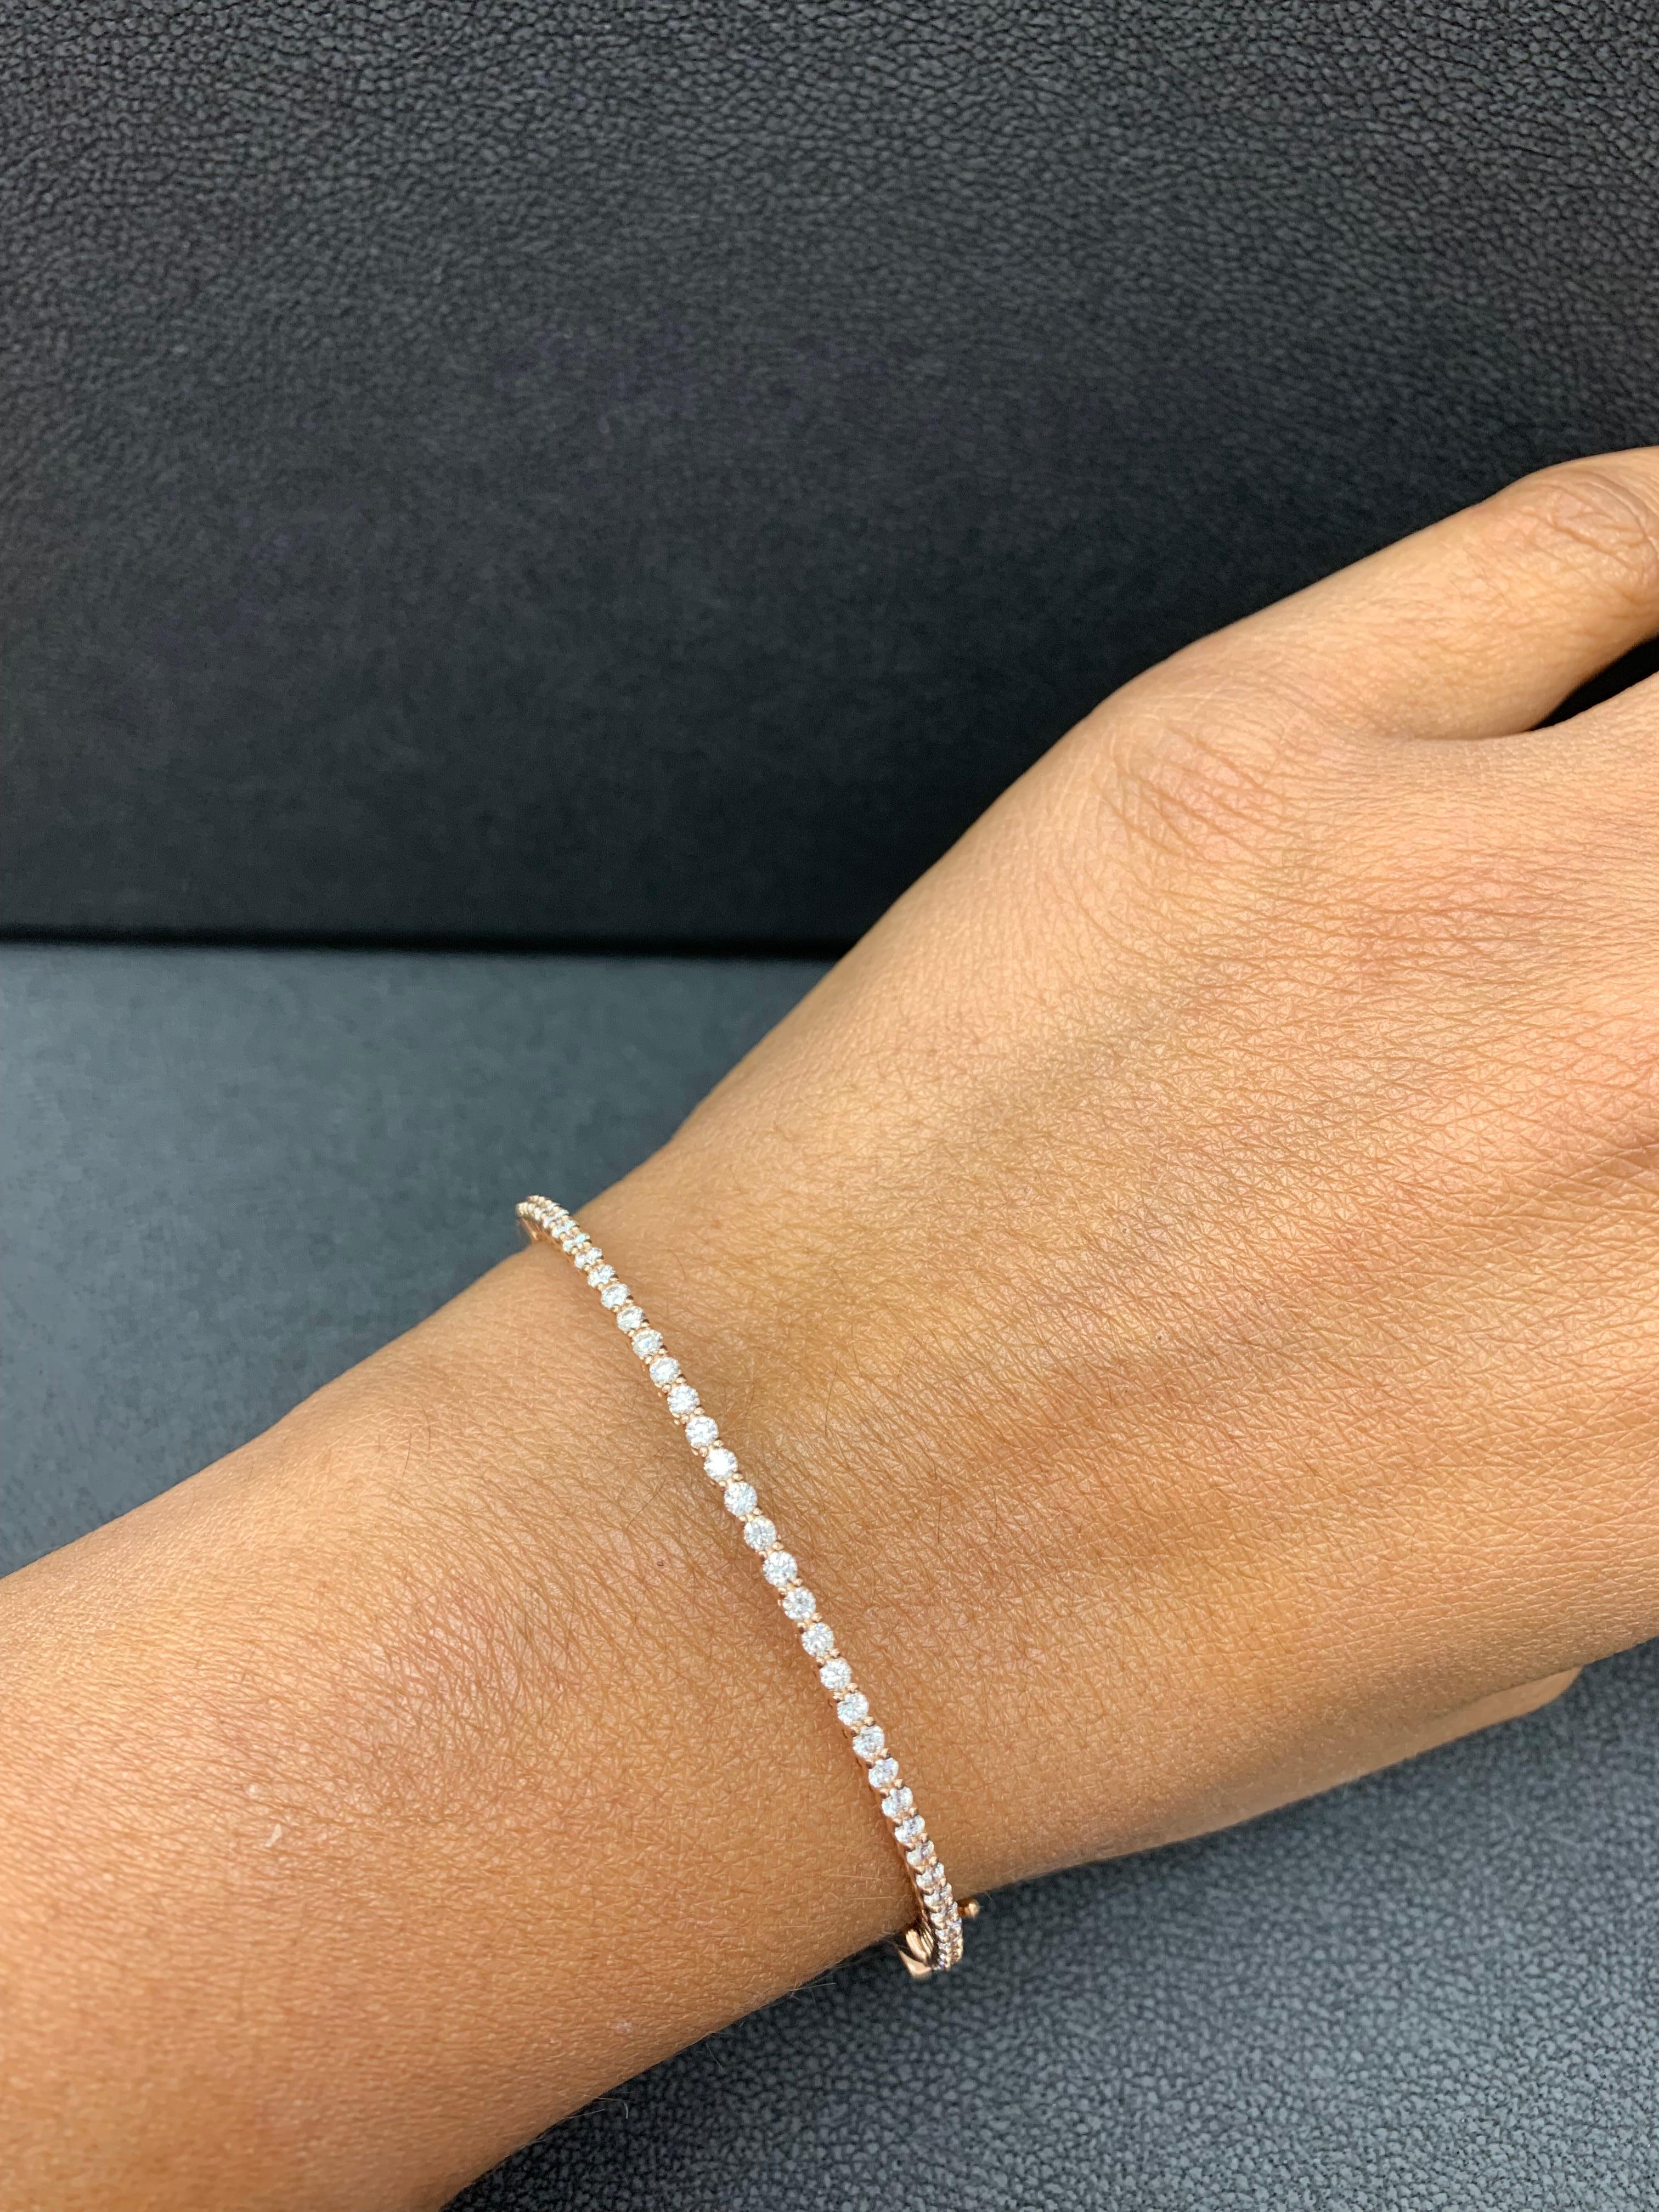 A simple but elegant bangle bracelet set with 39 round-cut diamonds weighing 1.01 carats total. Has a clasp to slip and wear the bangle securely. Made in 14k Rose Gold.

Style available in different price ranges. Prices are based on your selection